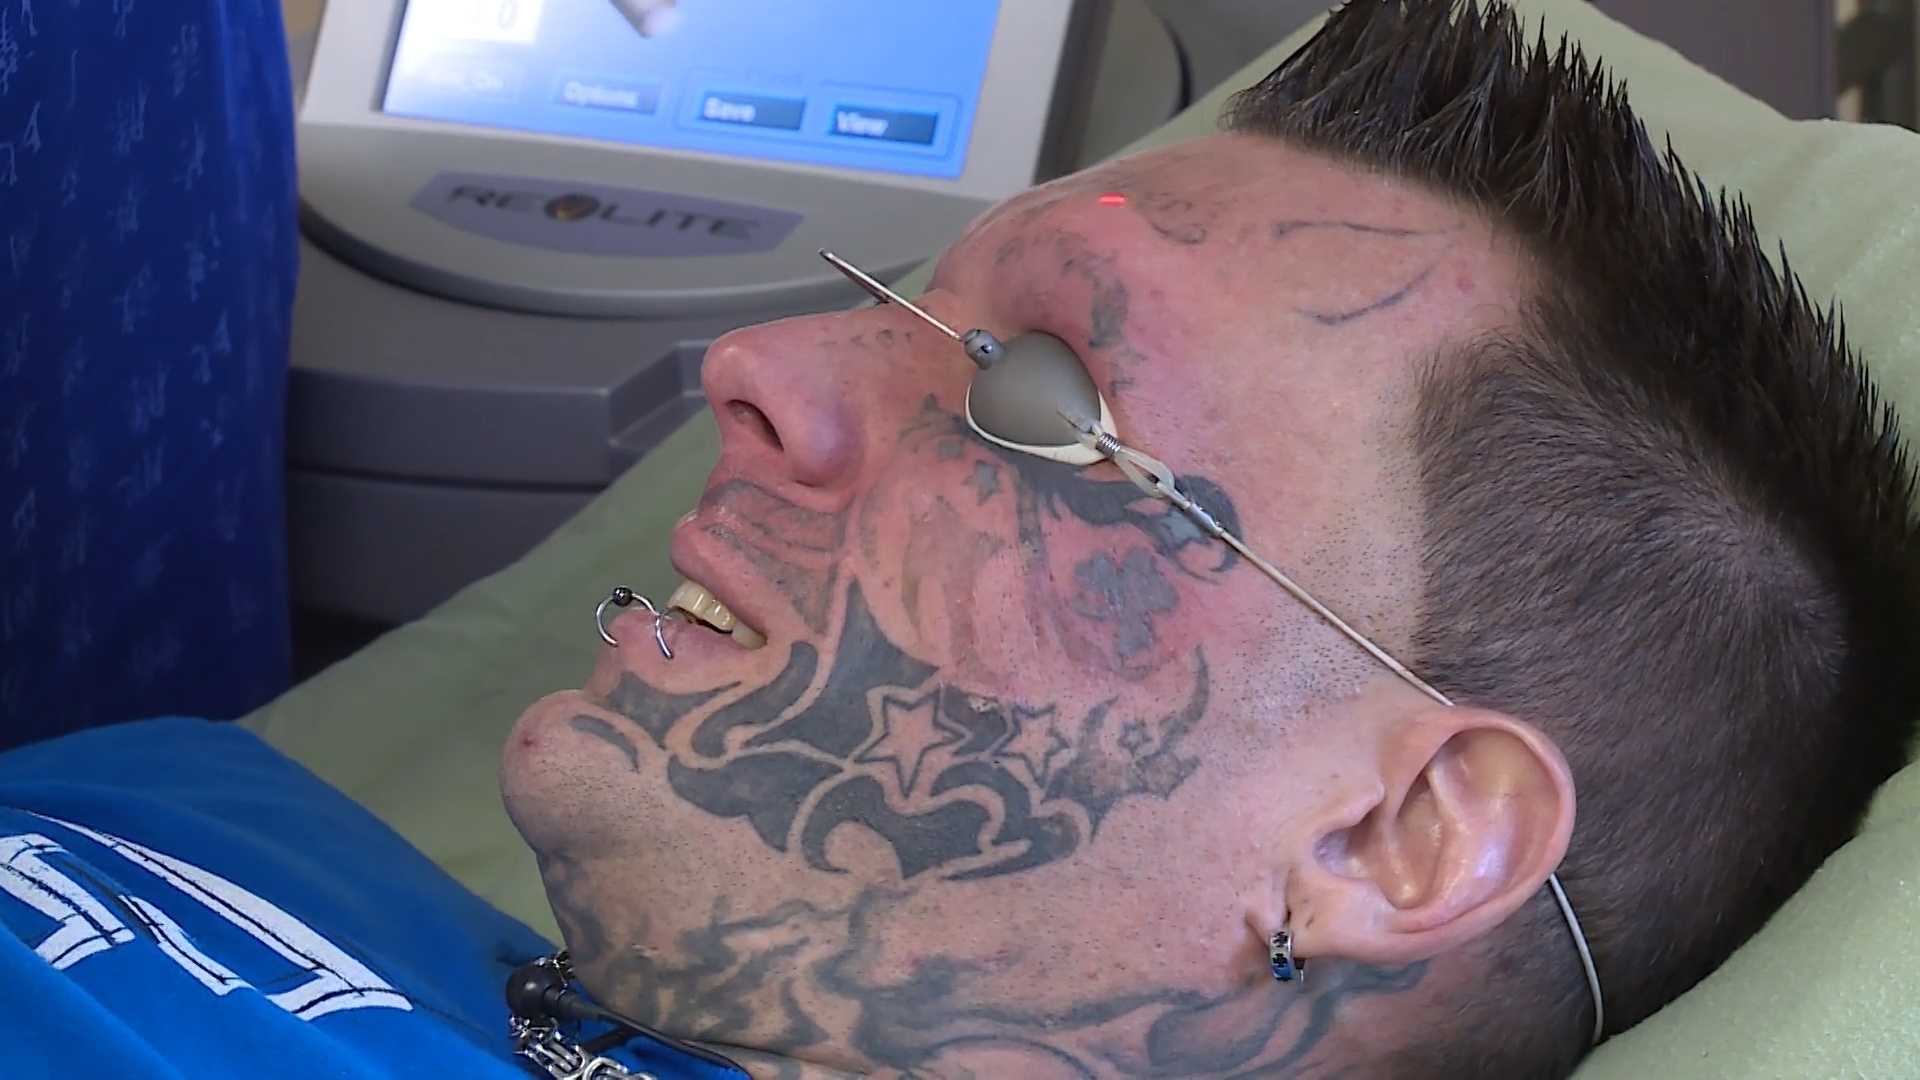 Face Tattoo Removal Services | Removery